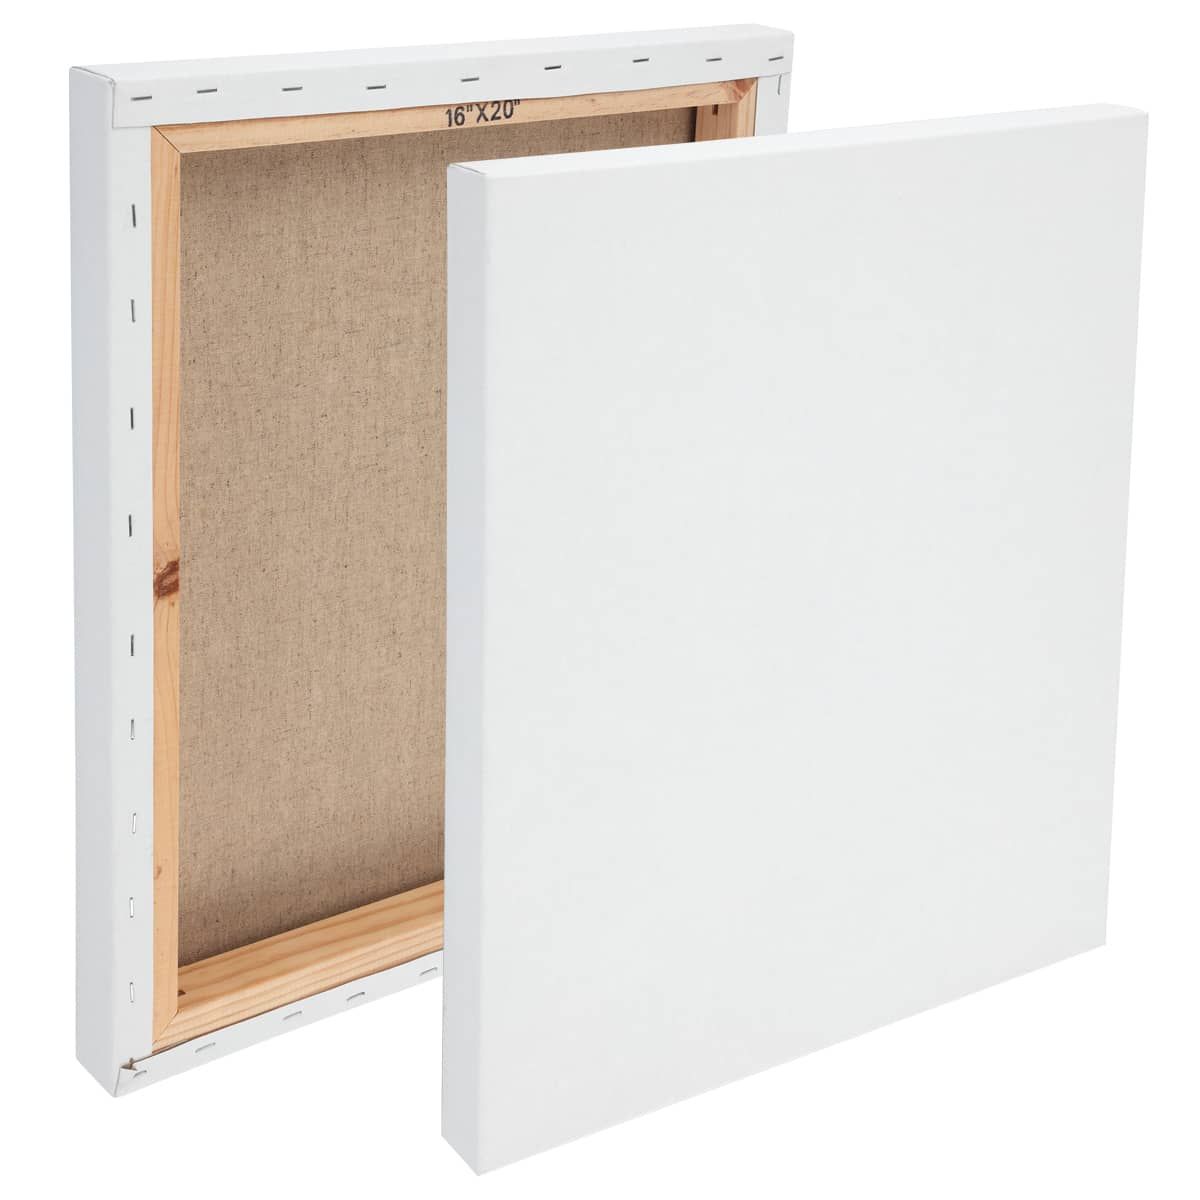 Centurion Universal Acrylic Primed Linen Panels -3x5Canvases for